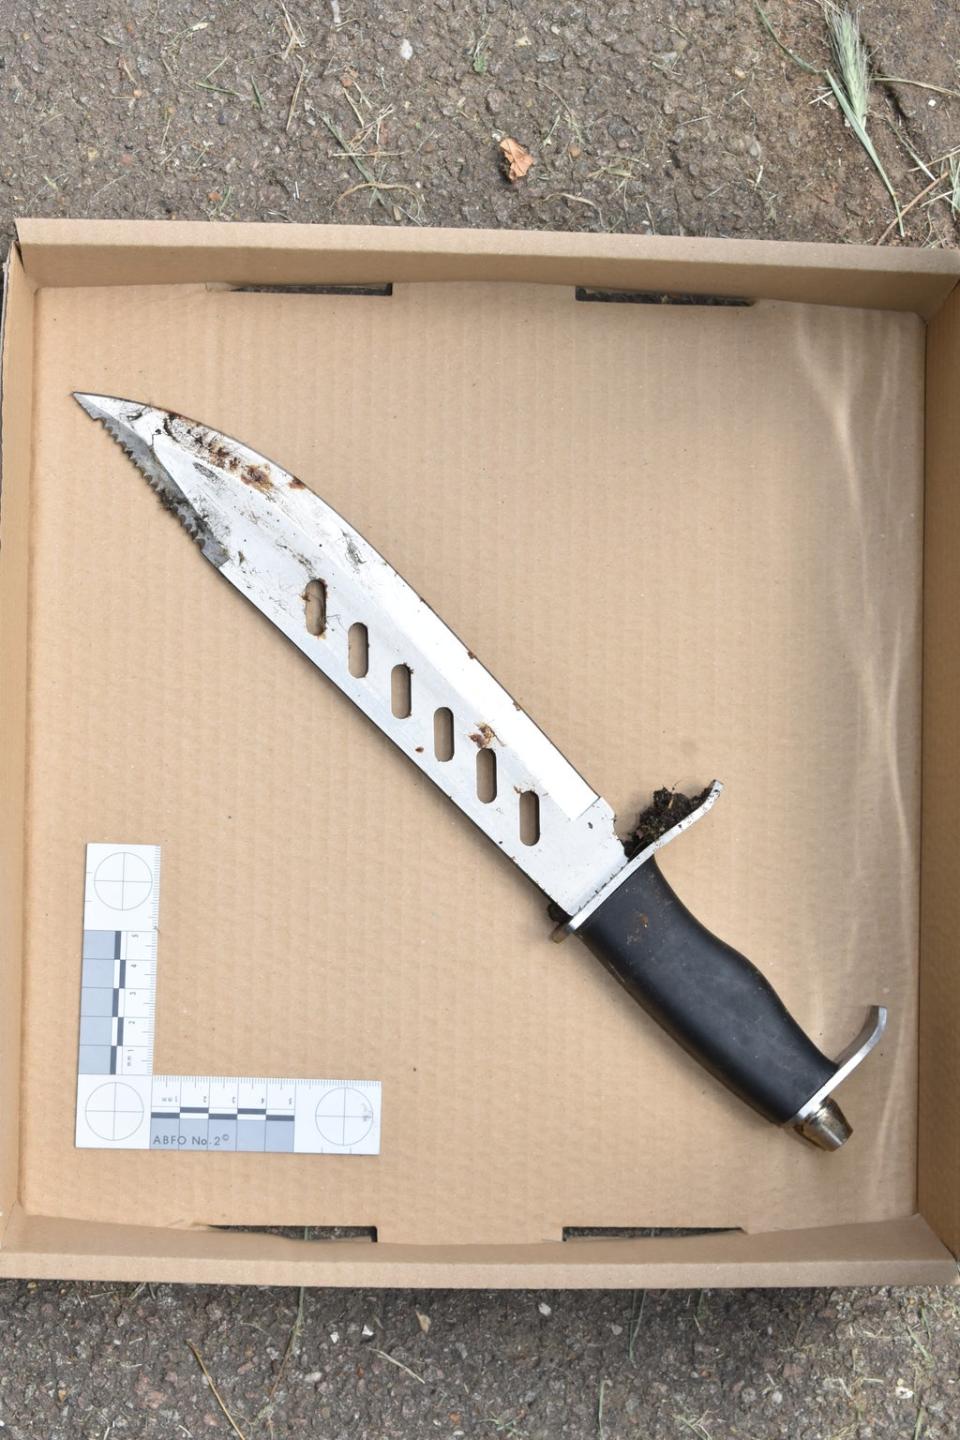 One of the knives used in the attack (Metropolitan Police/PA)